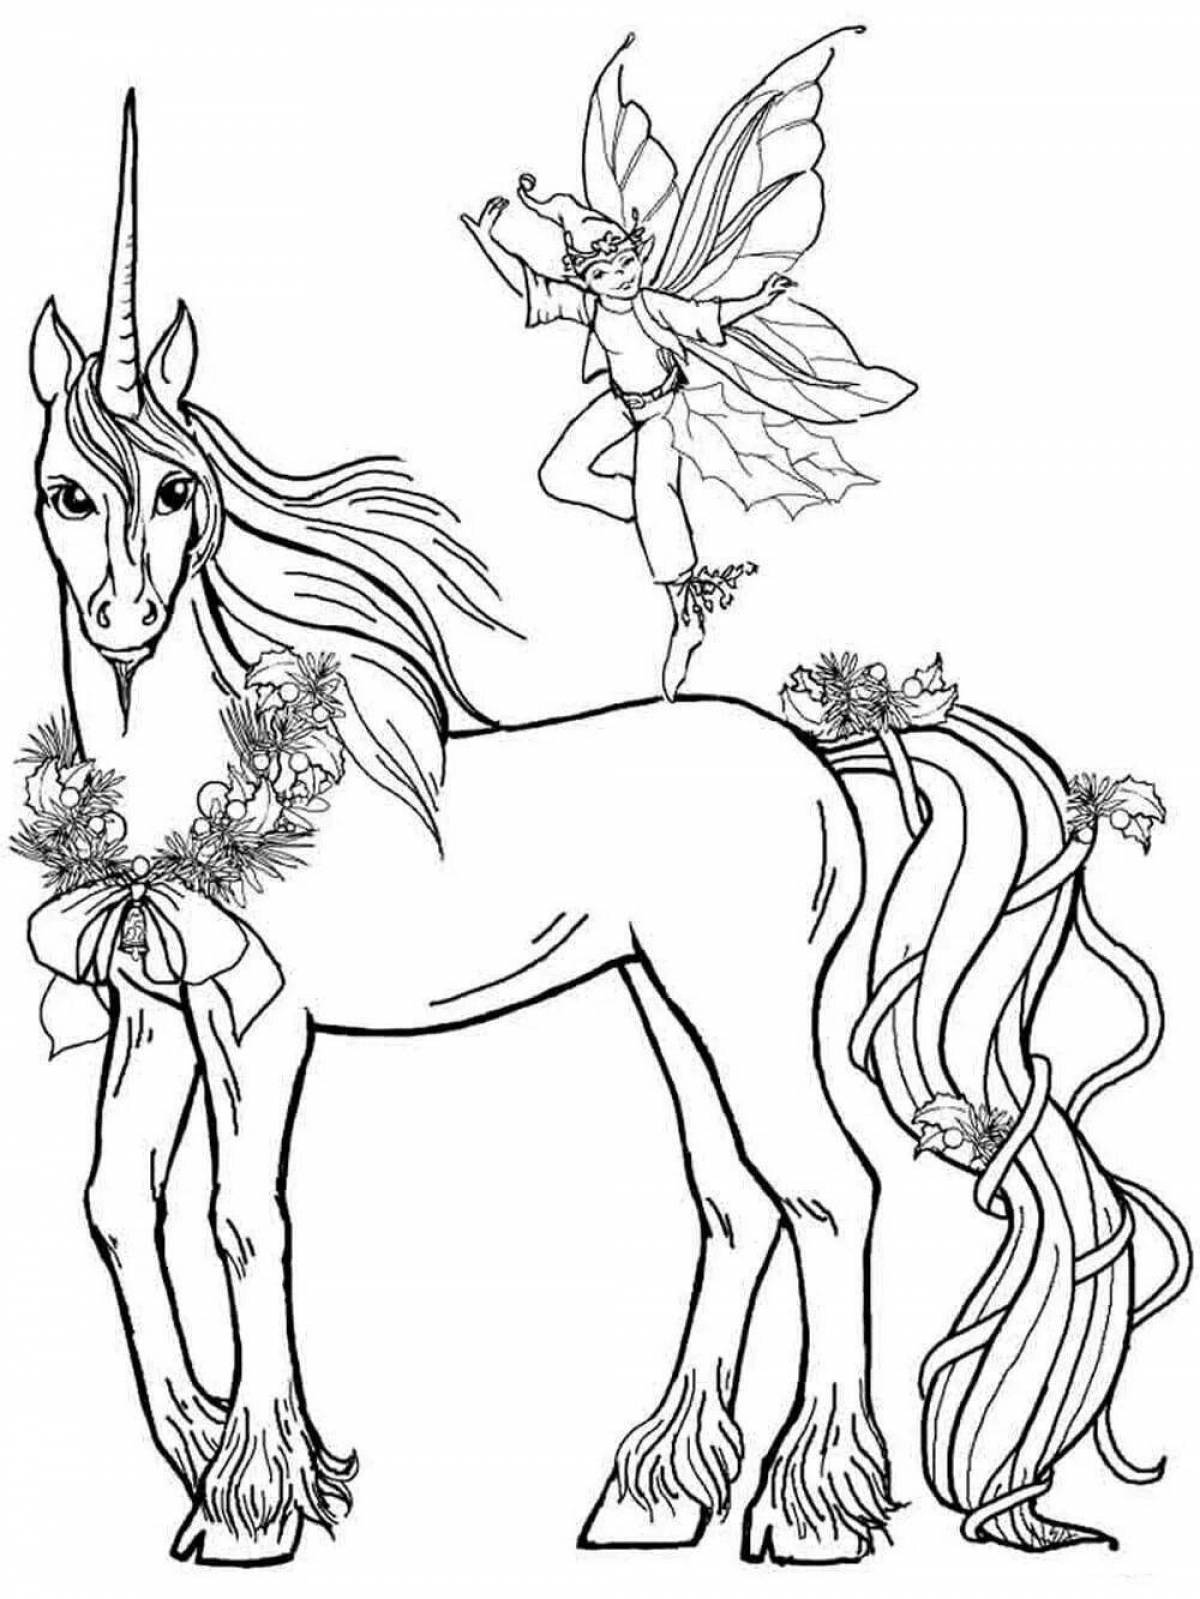 Fun coloring page one for kids